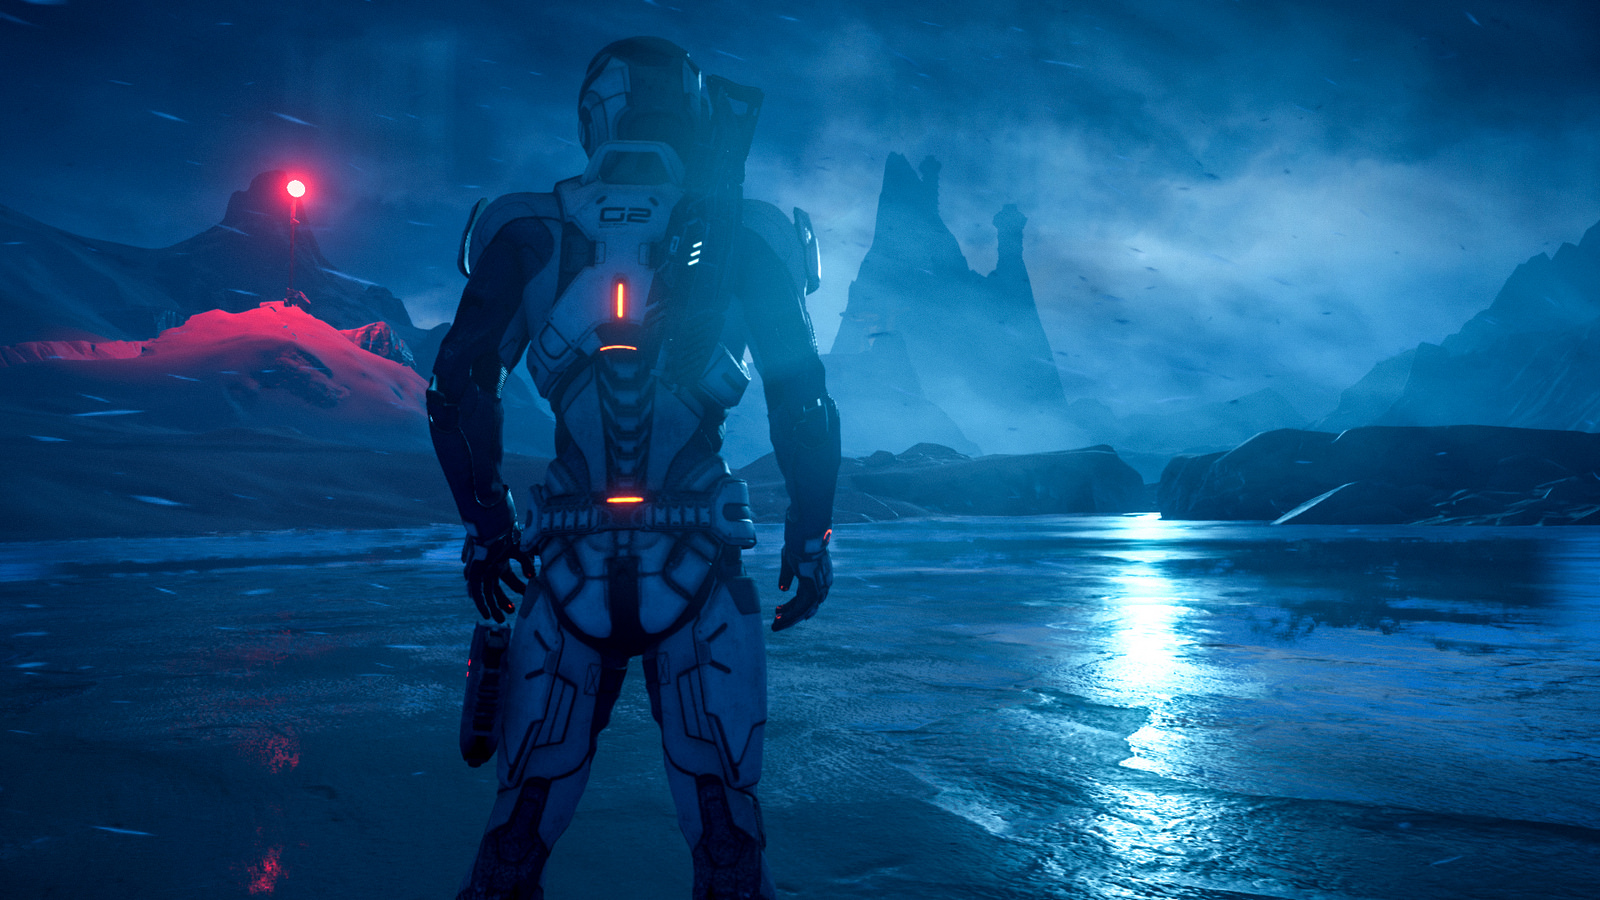 A taste of Mass Effect Andromeda has me wanting more